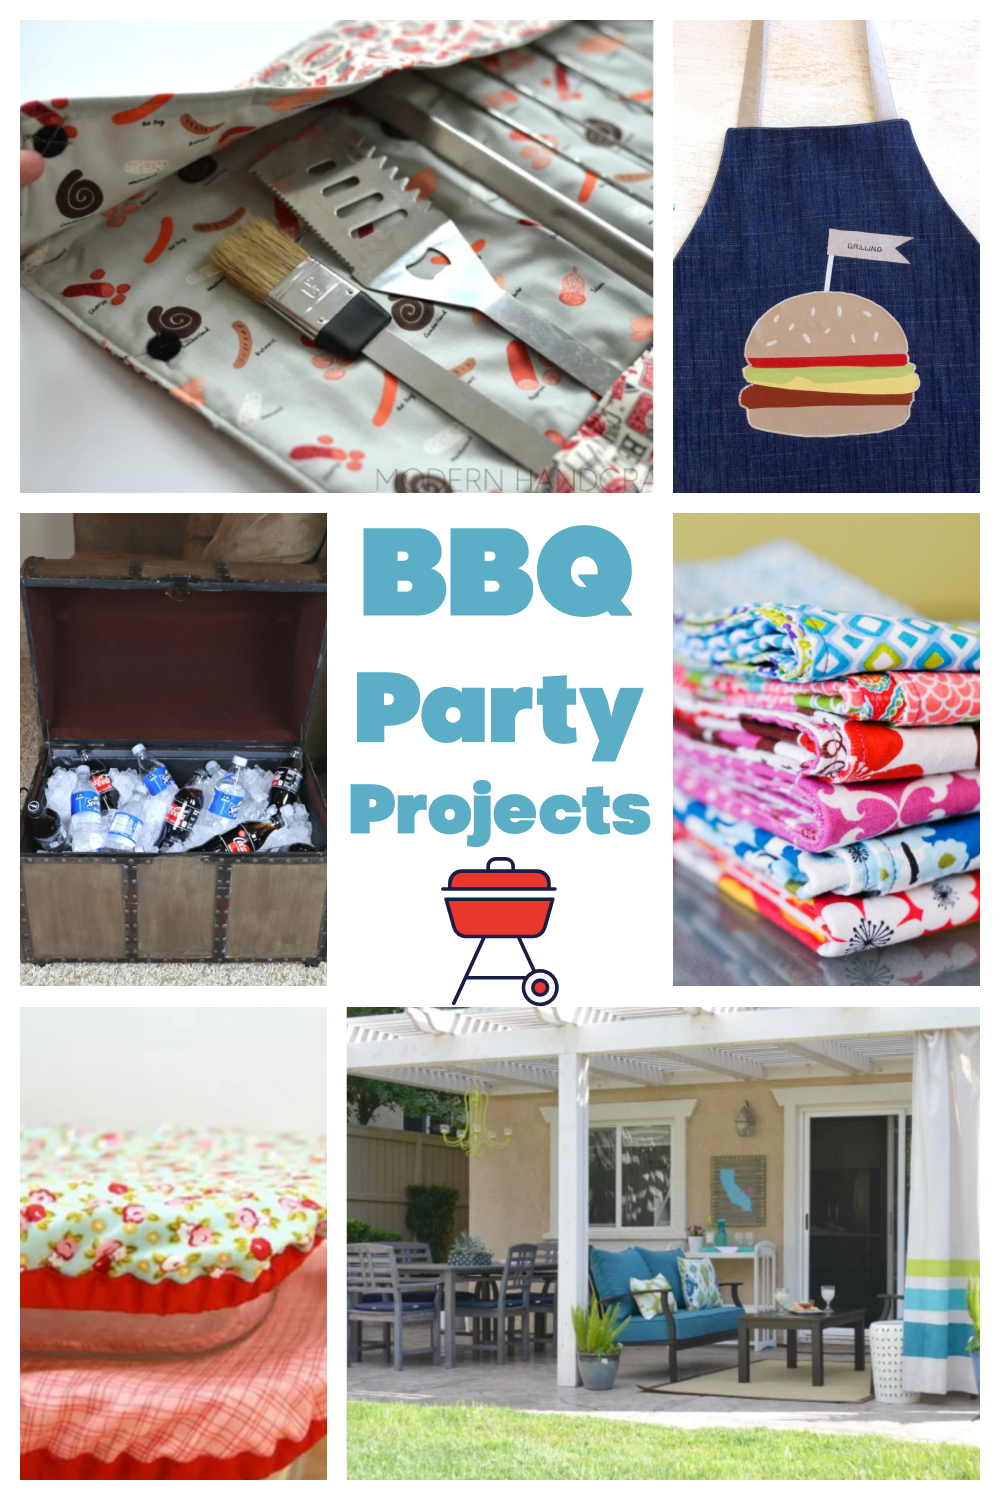 BBQ projects to sew